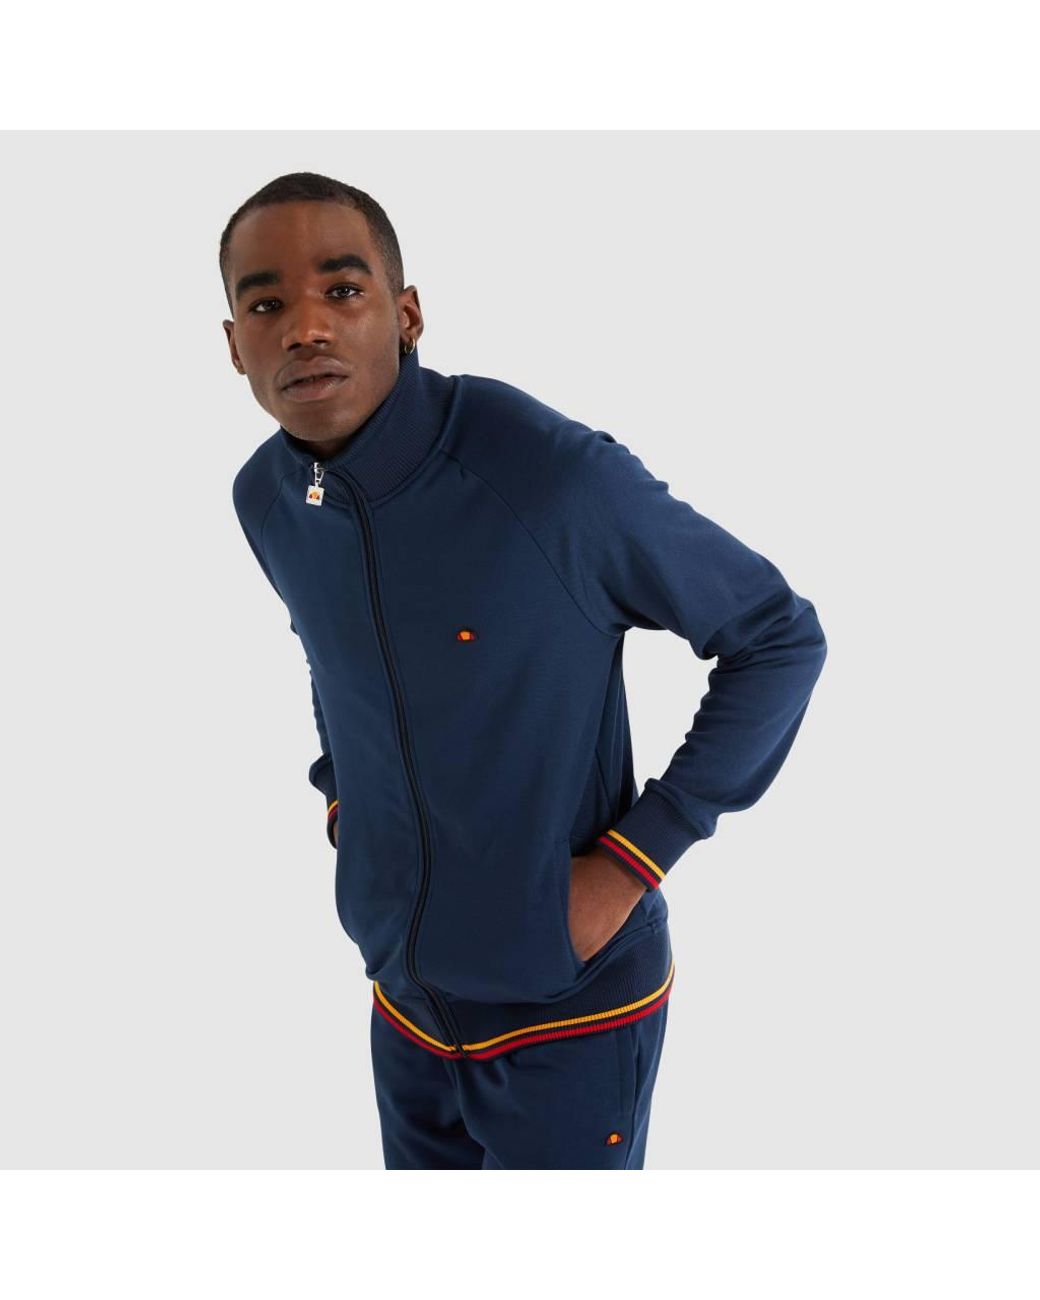 or Track Pants Mix Match Sold Seperately ellesse Sportwear Shell Track Top 